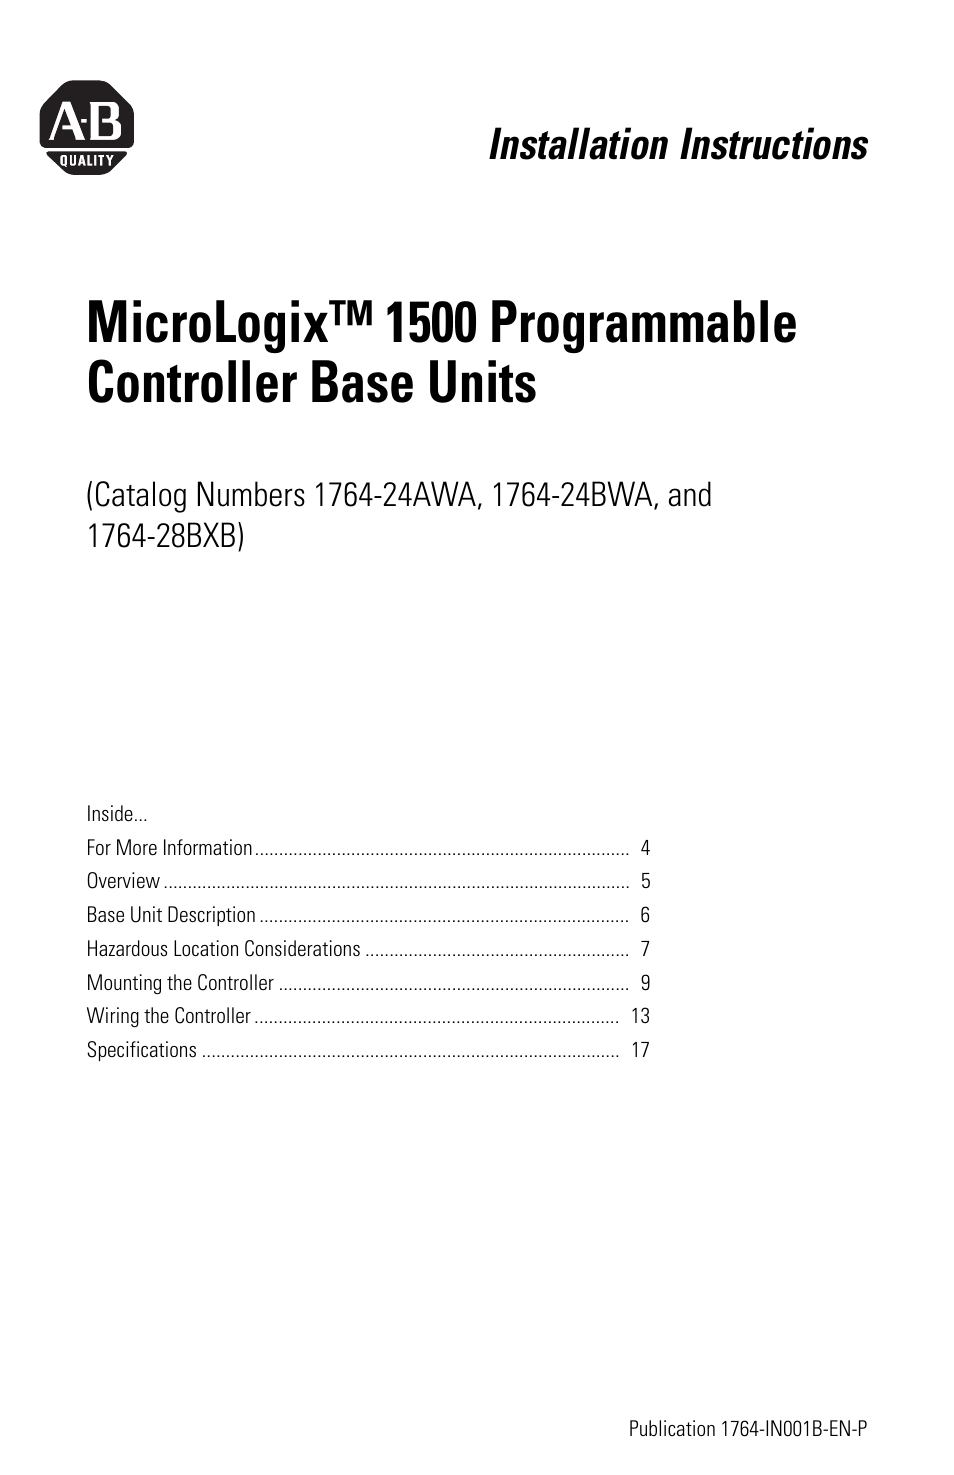 Installation instructions | Rockwell Automation 1764-28BXB MicroLogix 1500 Programmable Controller Base Units User Manual | Page 3 / 27